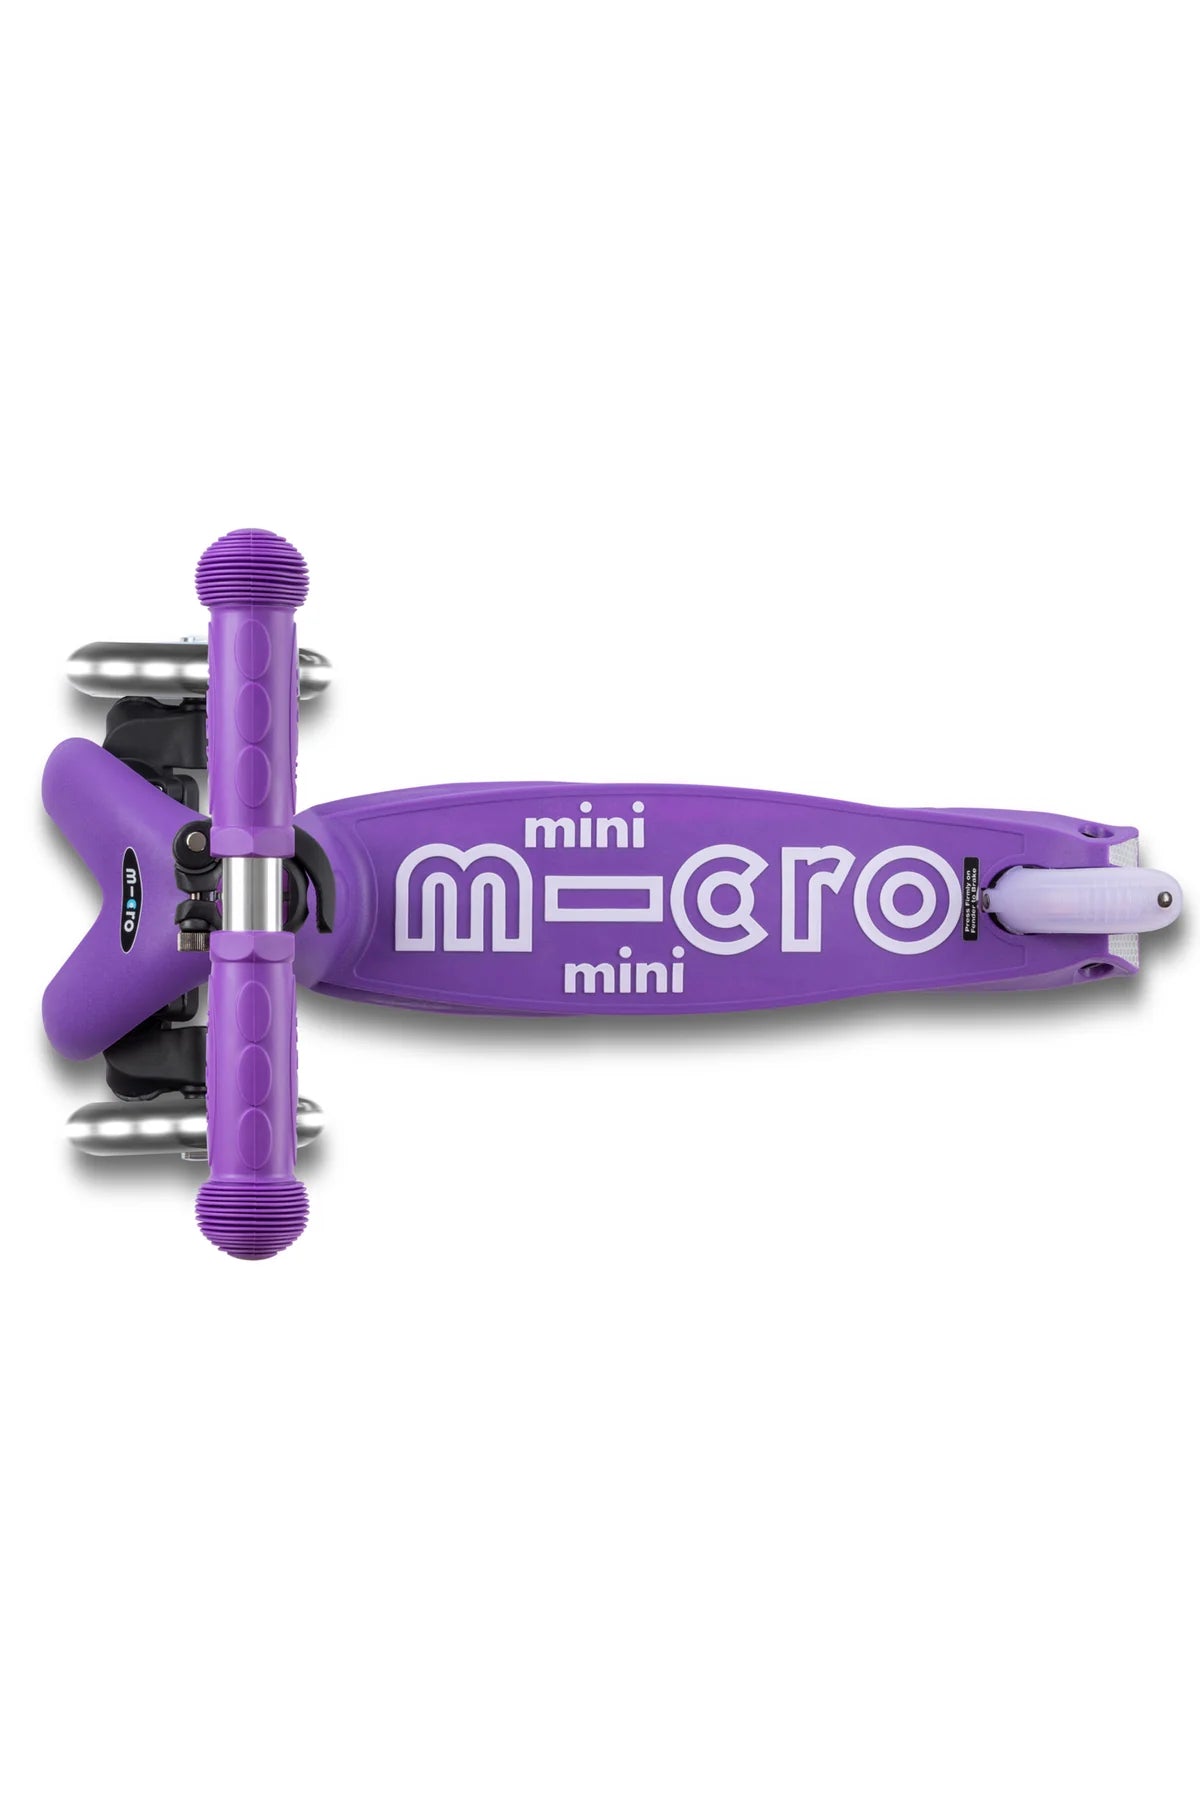 Micro Mini Foldable LED Scooter - Purple - LOCAL PICK UP ONLY